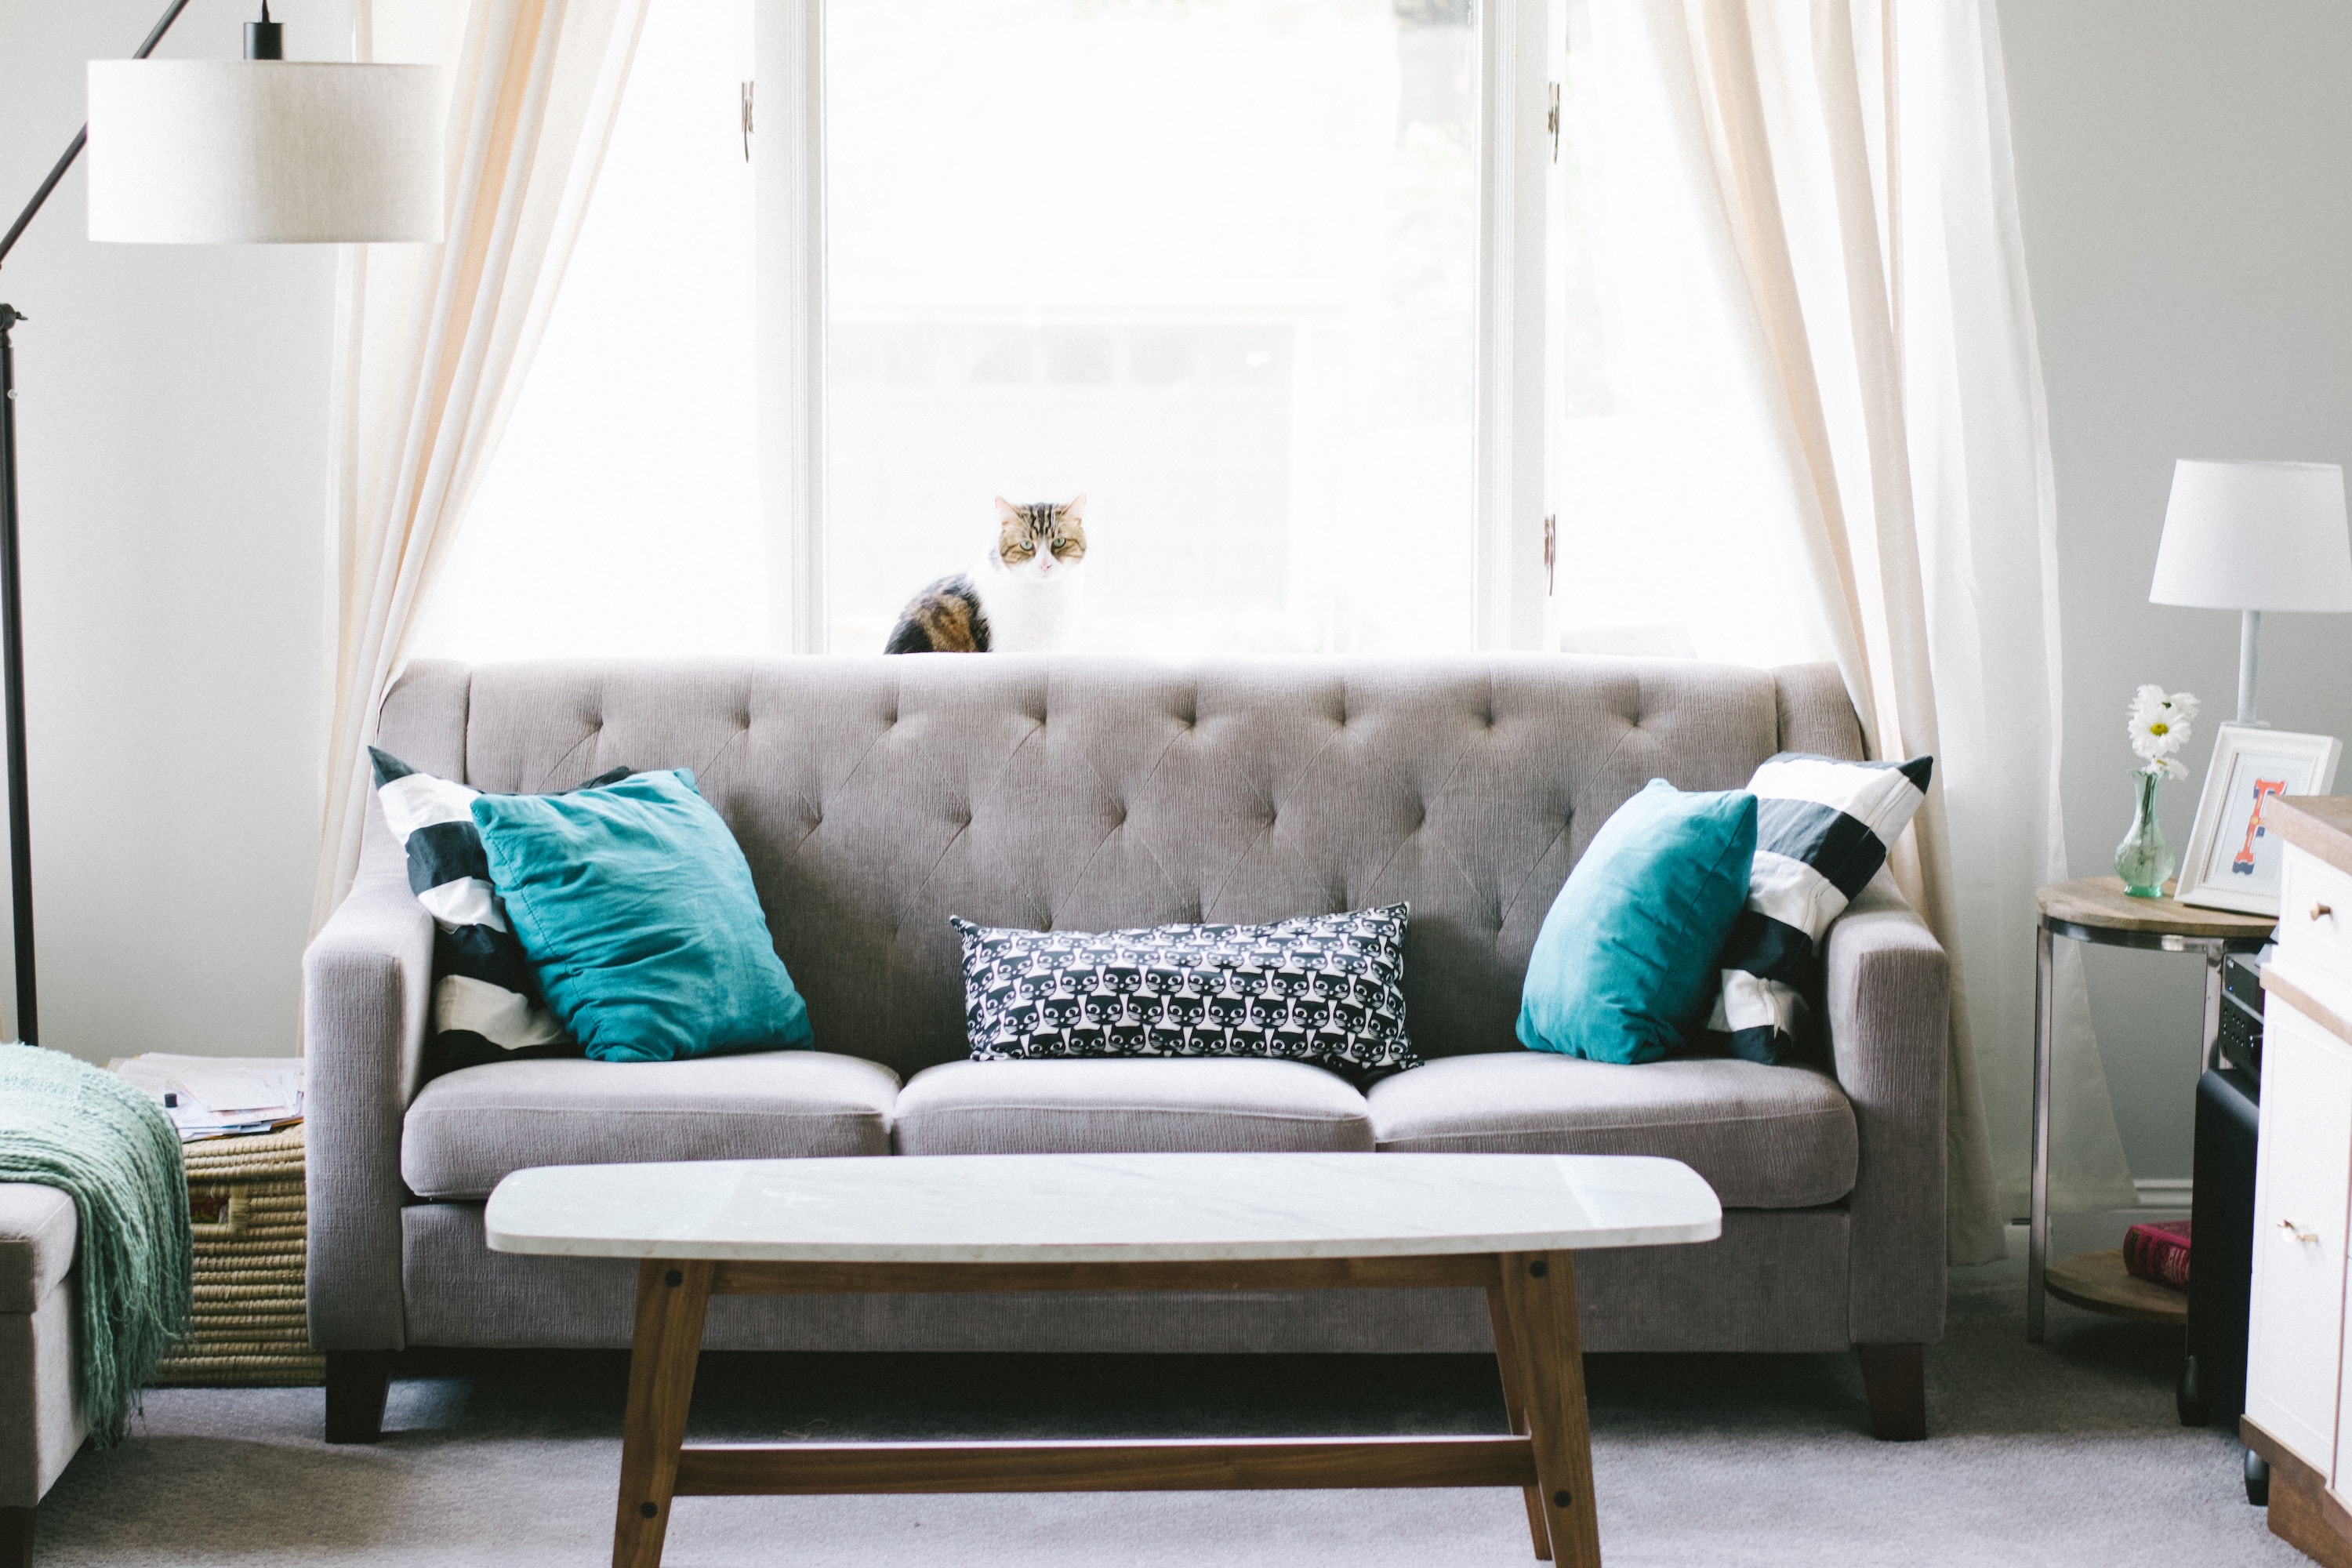 Home Design Trends to Copy in 2019